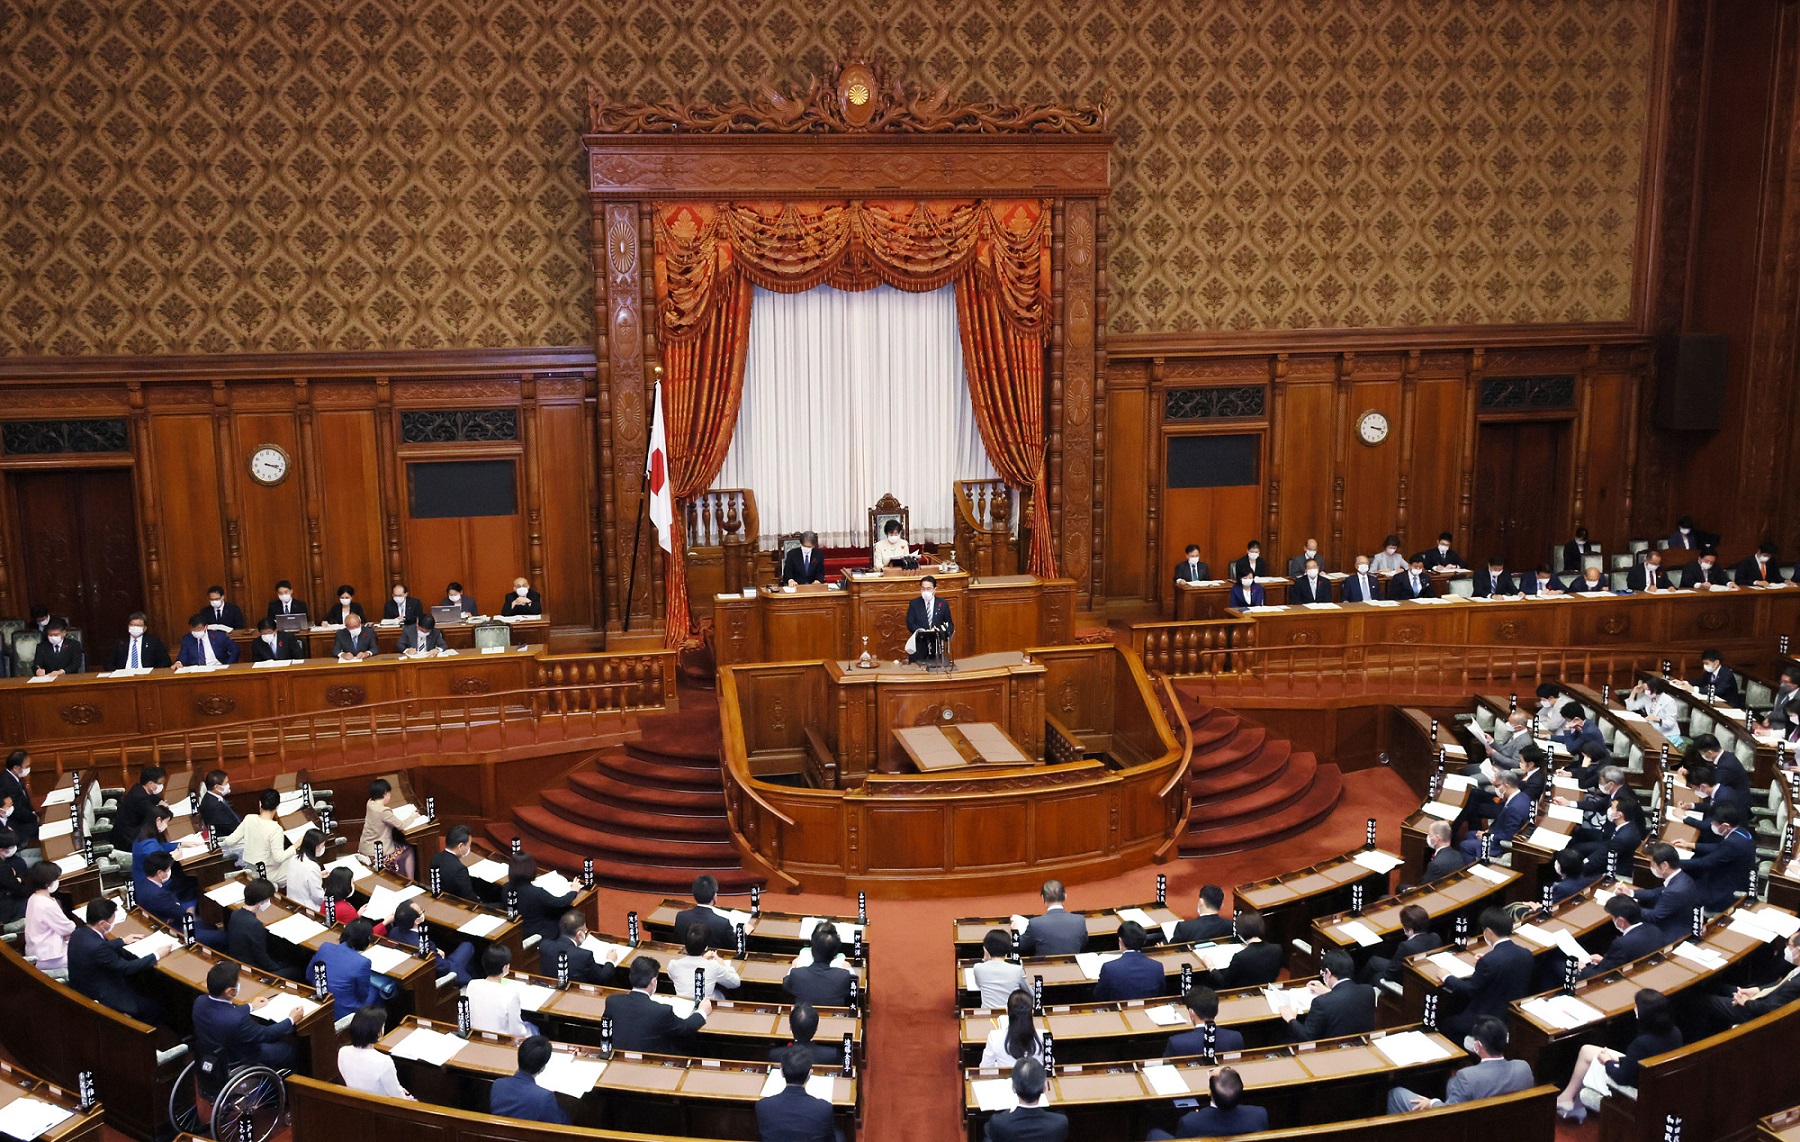 Photograph of the Prime Minister delivering a policy speech during a plenary session of the House of Representatives (9)